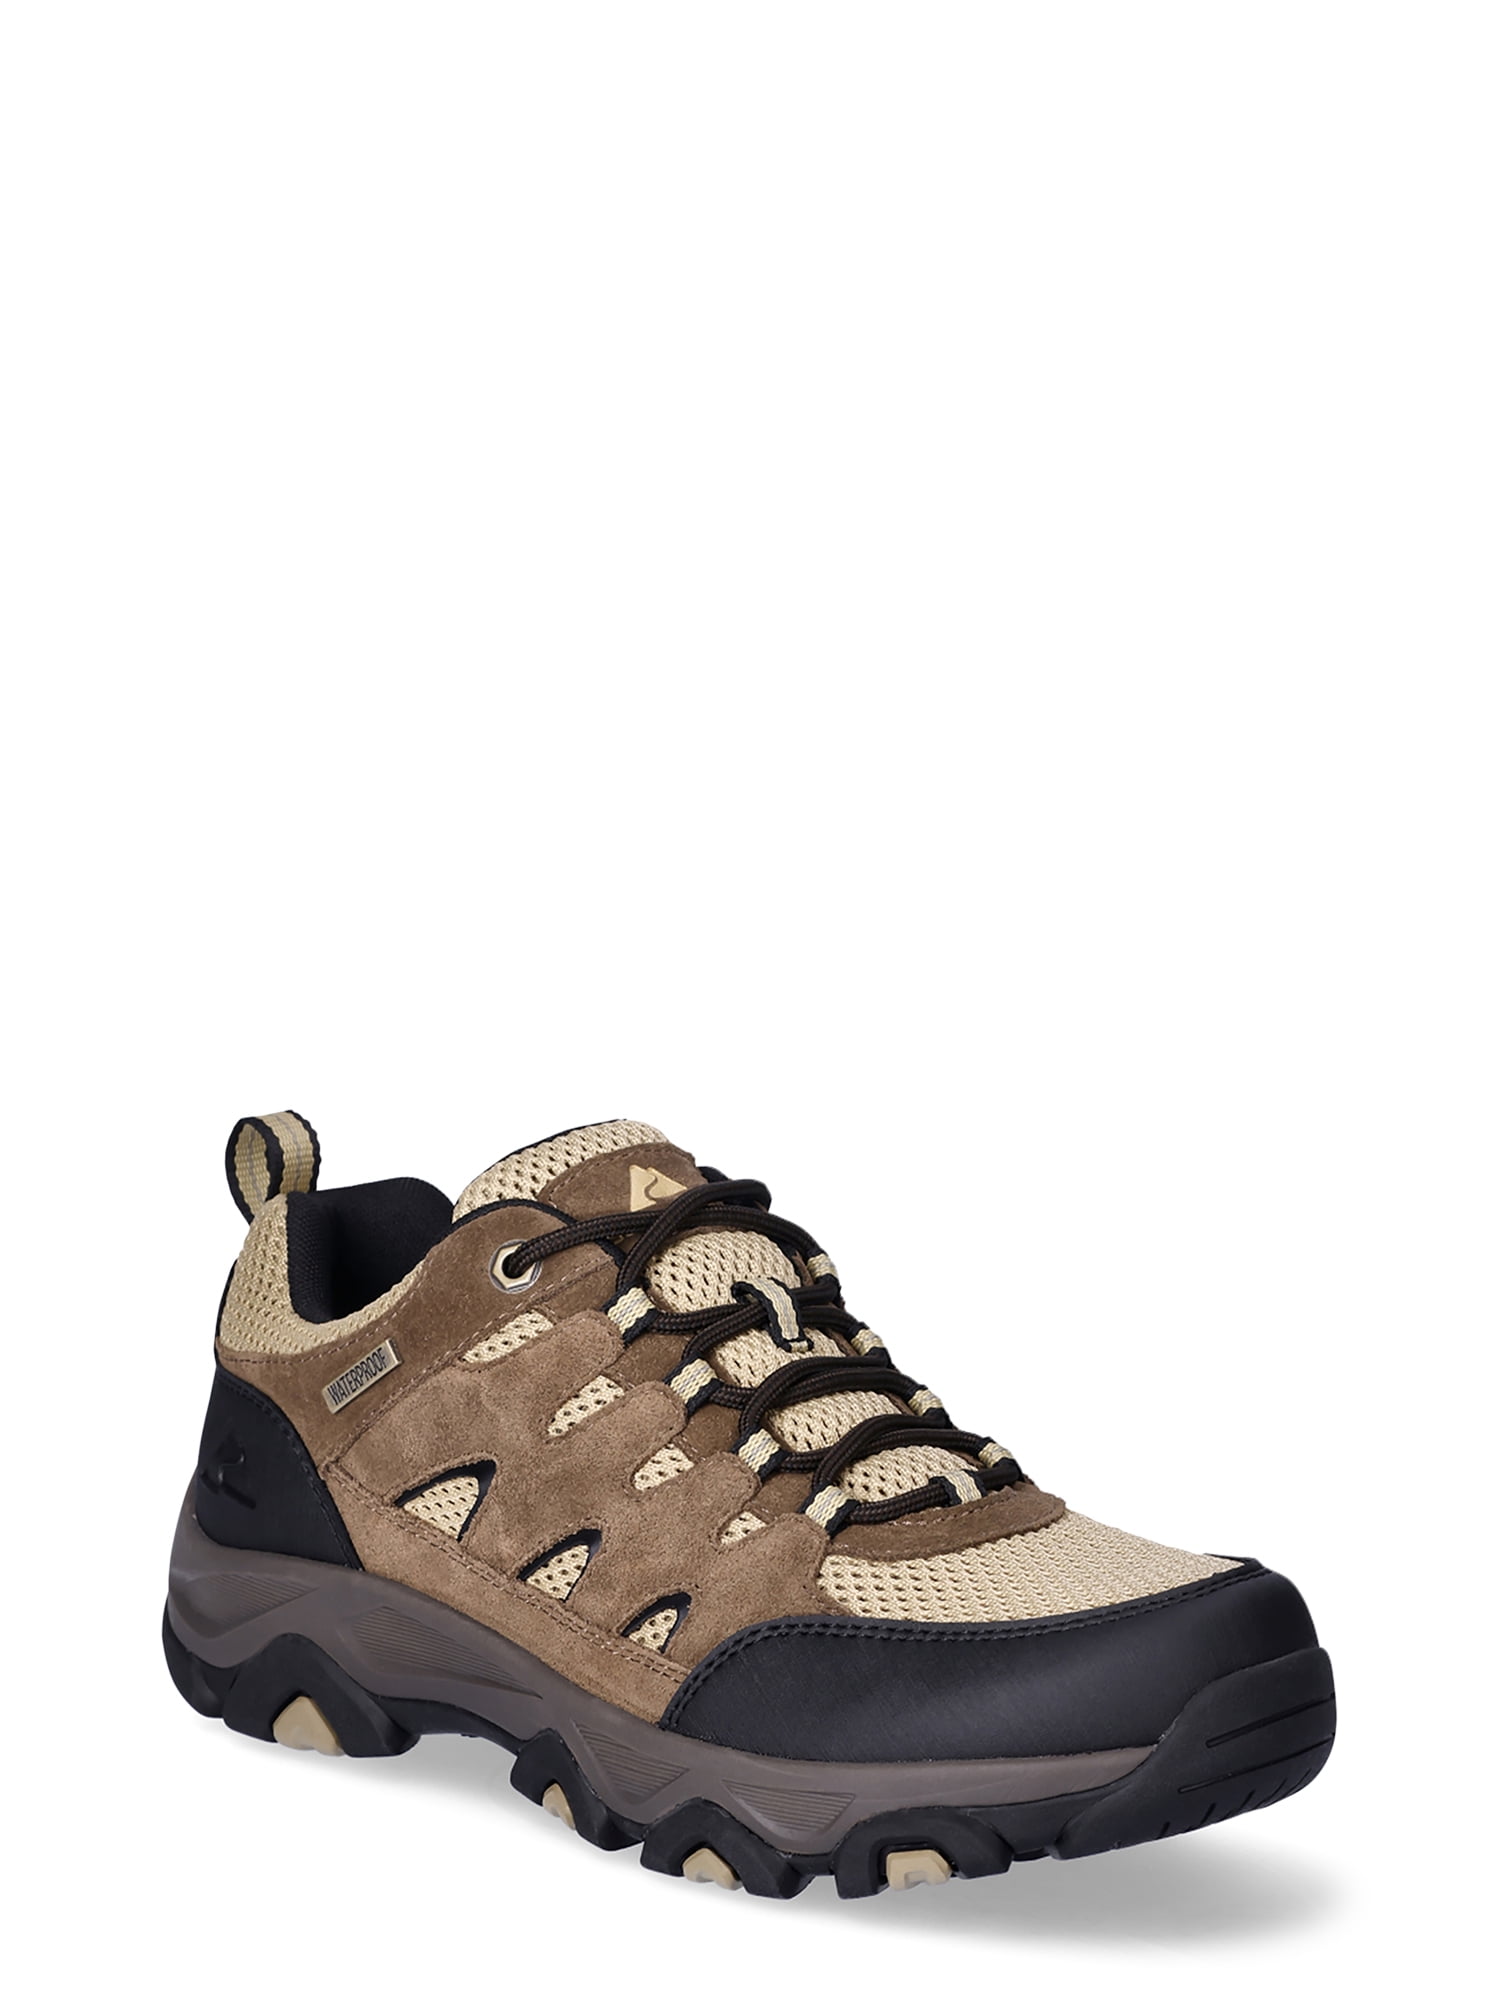 Ozark Trail Mens Lightweight Hiking Shoes (8, 10, 11, 11.5) $12.86, (9, 9.5, 10.5, 12) $16.57, More + Free S&H w/ Walmart+ or $35+